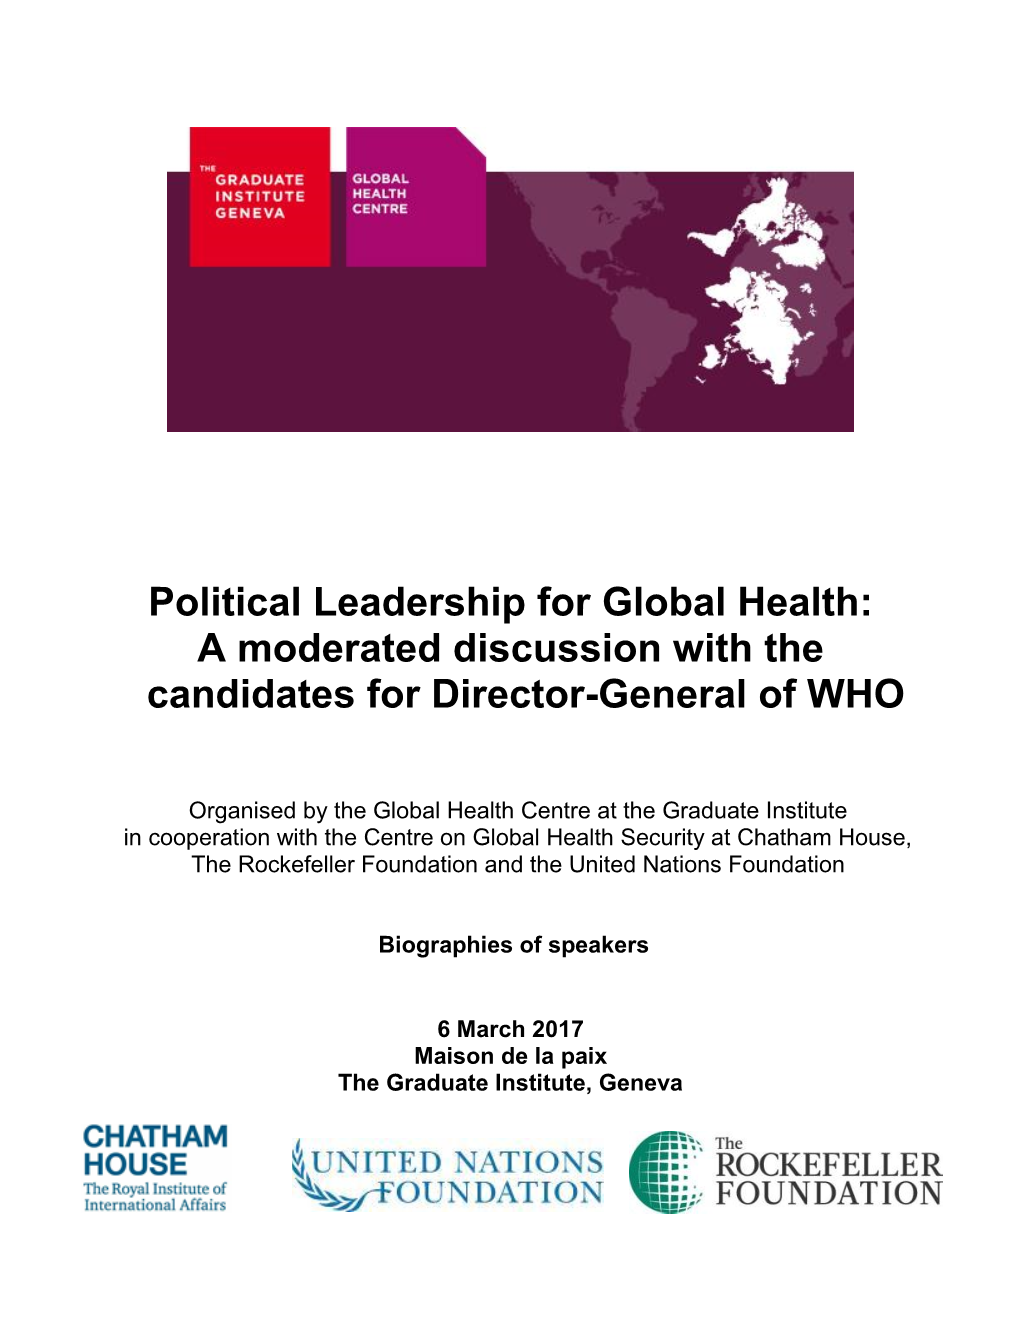 Political Leadership for Global Health: a Moderated Discussion with the Candidates for Director-General of WHO